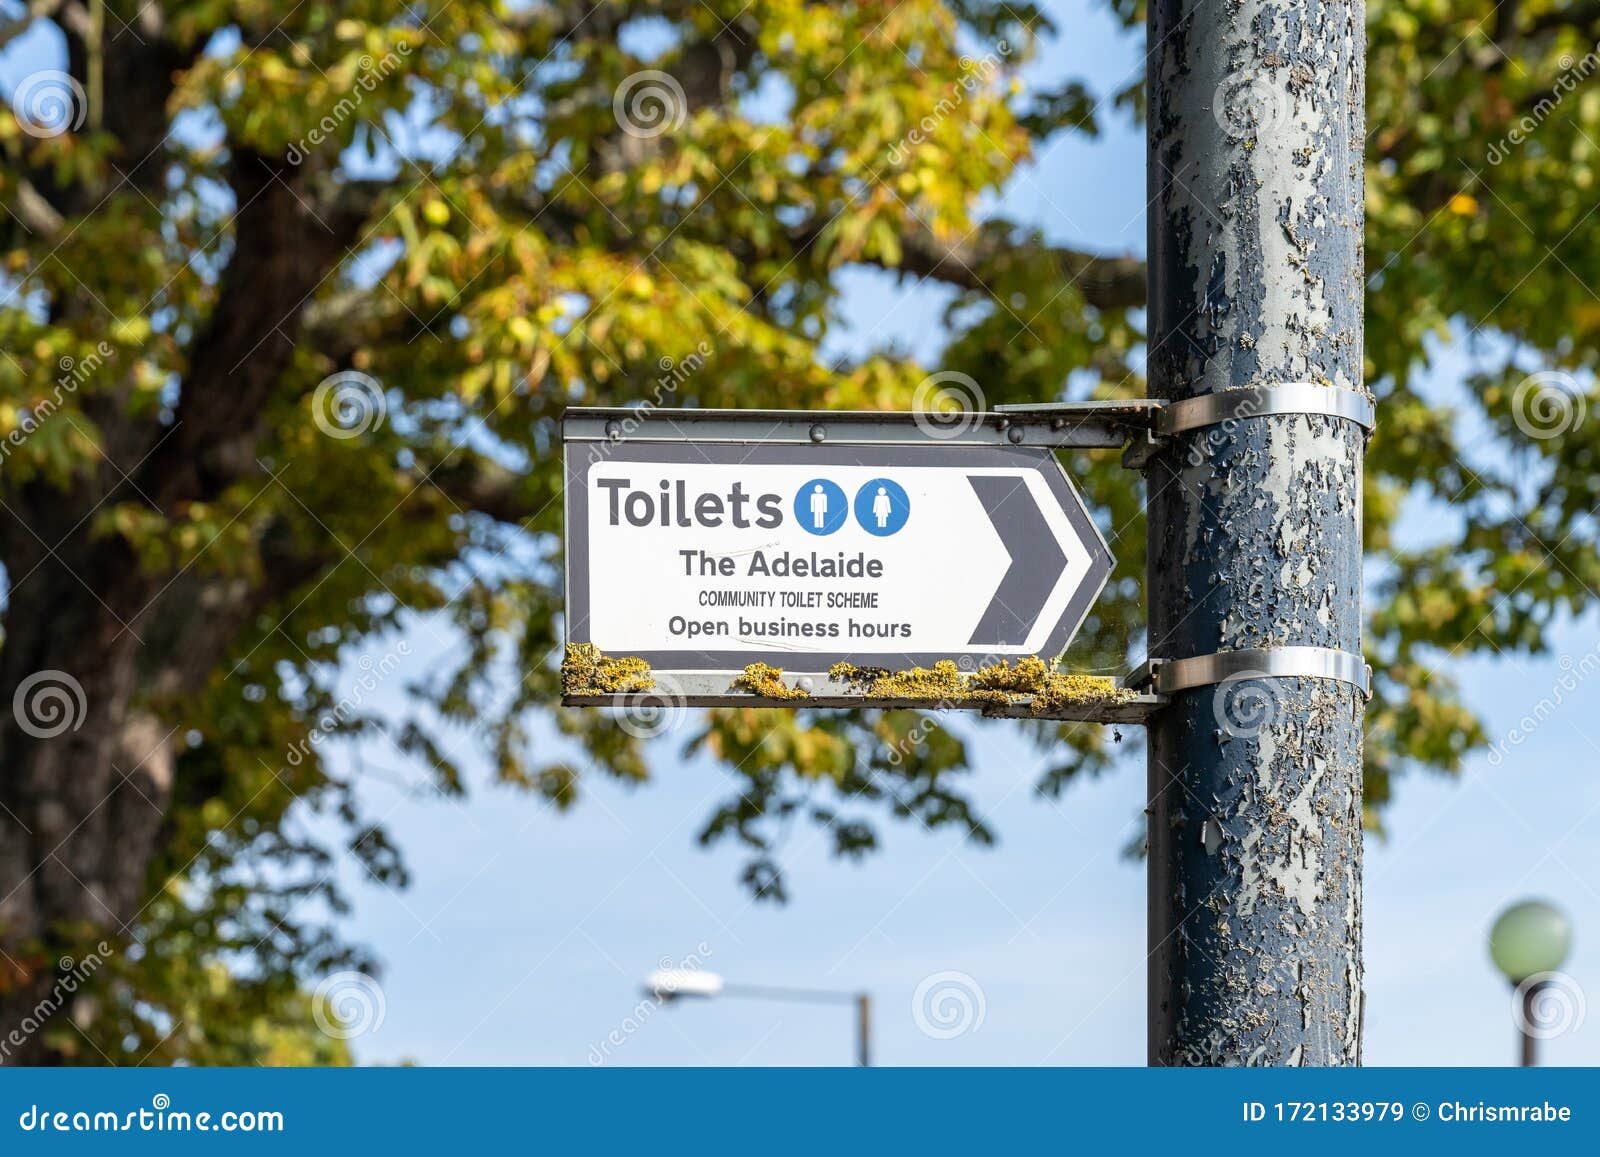 a sign giving directions to a member of community toilet scheme in teddington, london, england